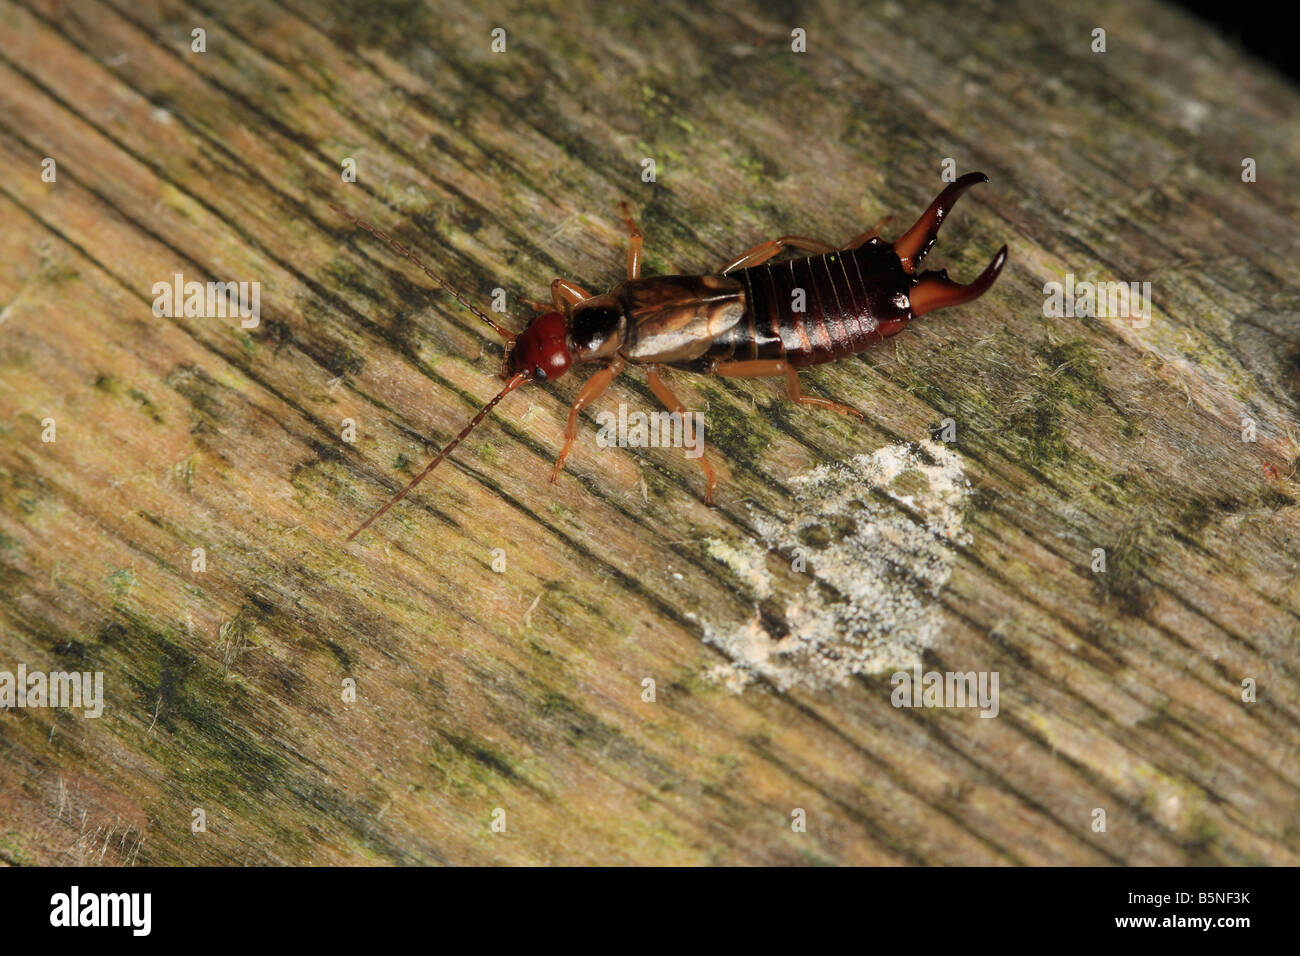 EARWIG Forficula auricularia MALE ON WOODEN POST Stock Photo